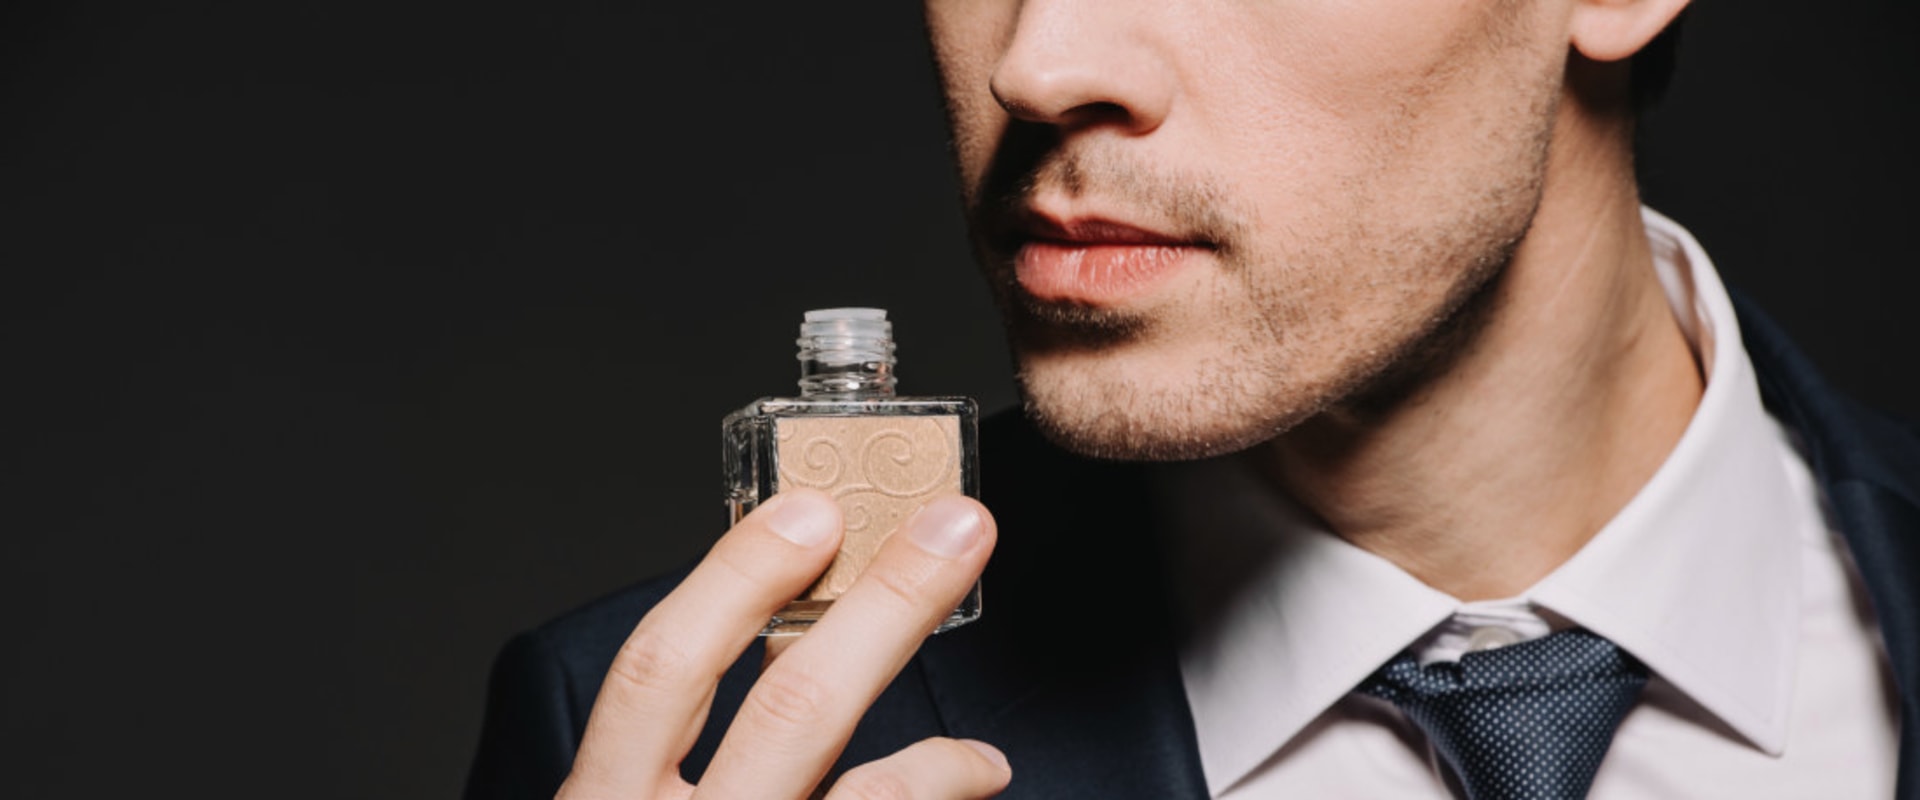 Cologne Reviews: An In-depth Look